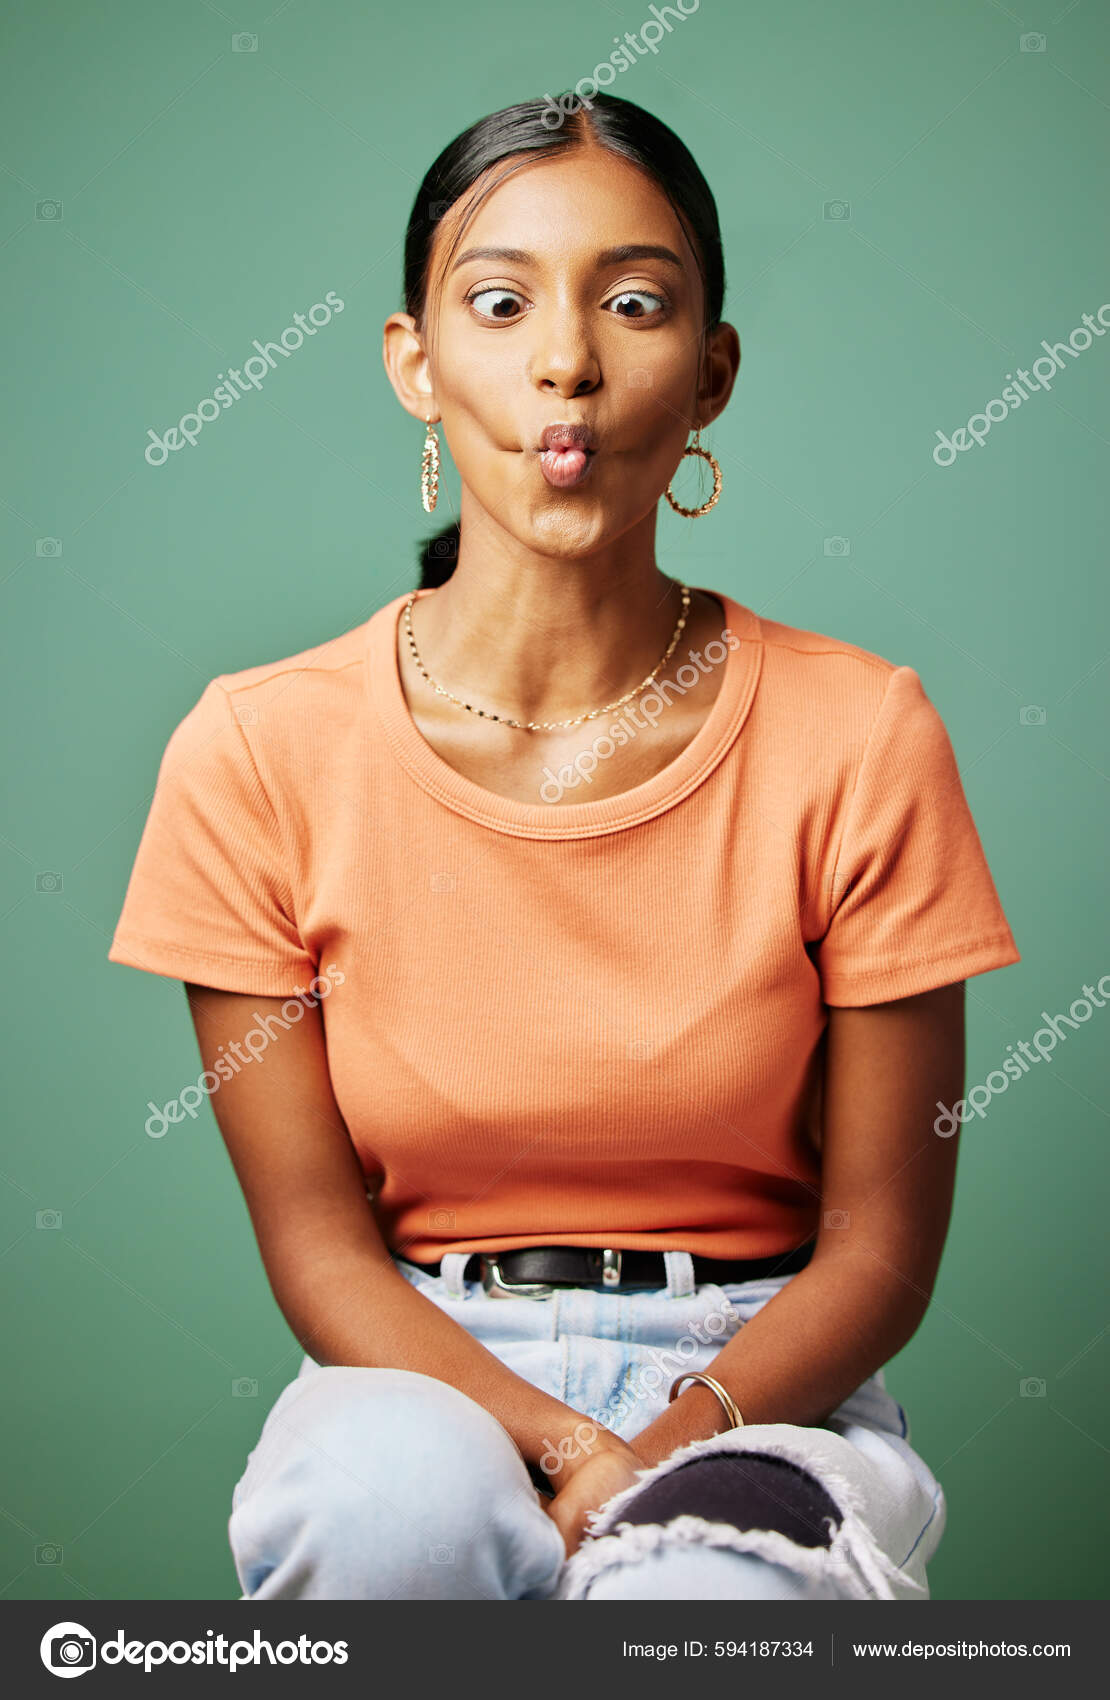 Quirky Woman Making Funny Face Shot Studio Background — Stockfotografi ©  PeopleImages.com #594187334